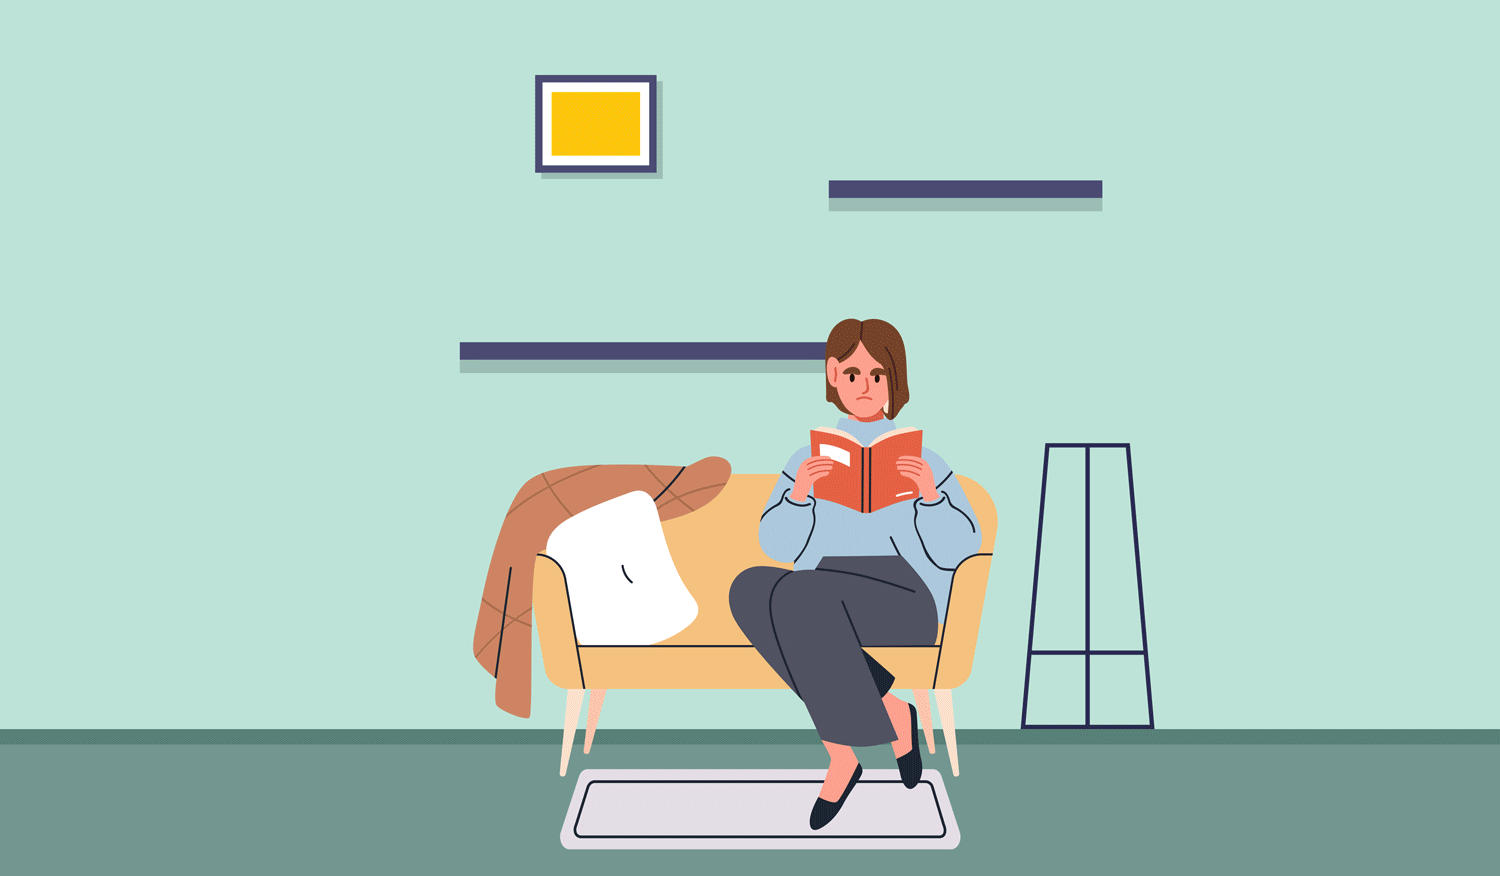 A woman who is sitting and reading goes from sad to happy as plants are added to the room.